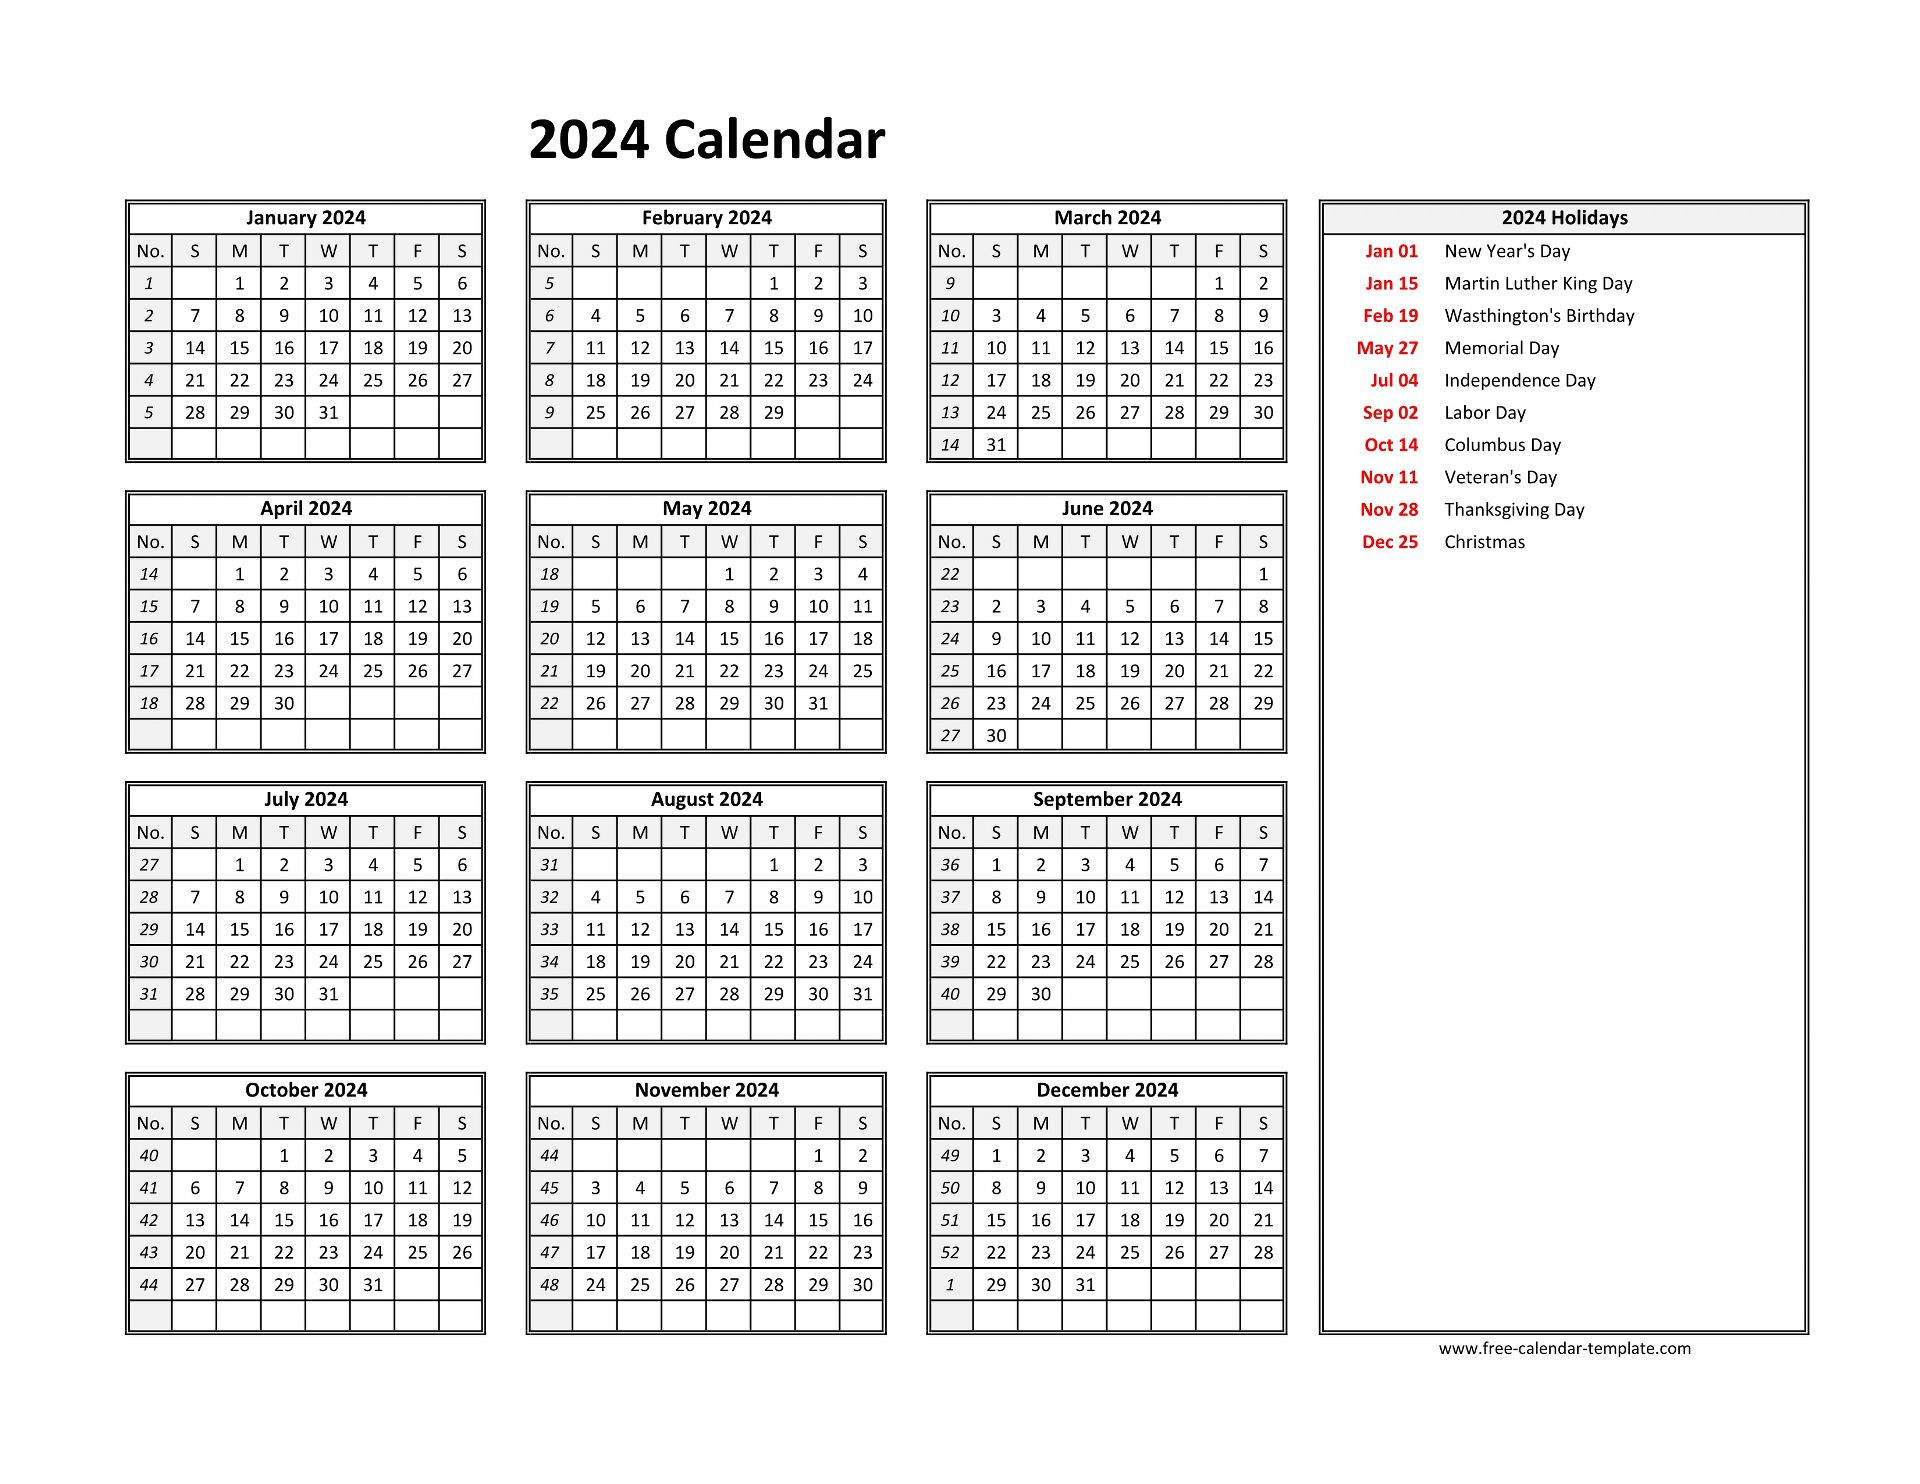 Printable Yearly Calendar 2024 | Free-Calendar-Template | Yearly Calendar Events 2024